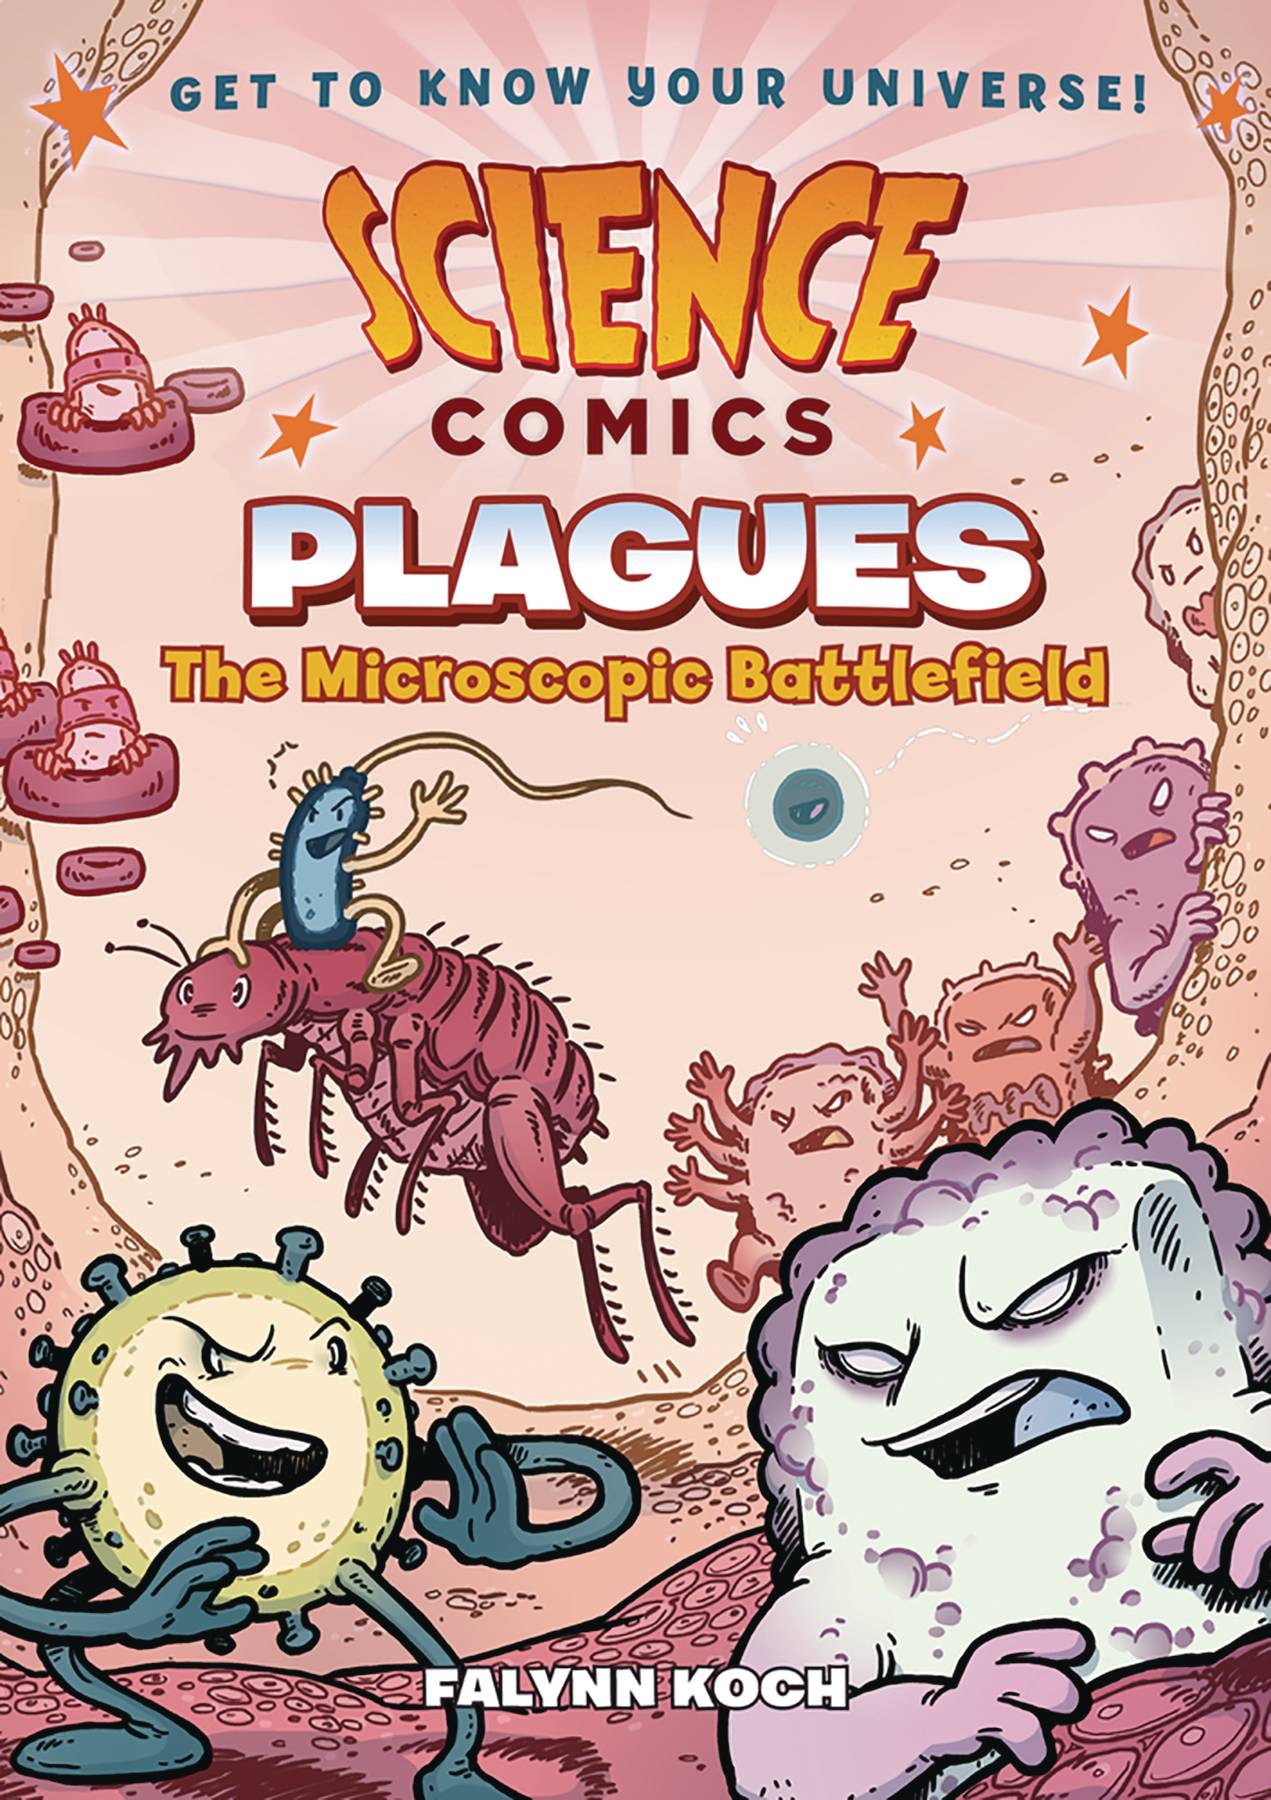 Science Comics Plagues Soft Cover Graphic Novel Microscopic Battlefield